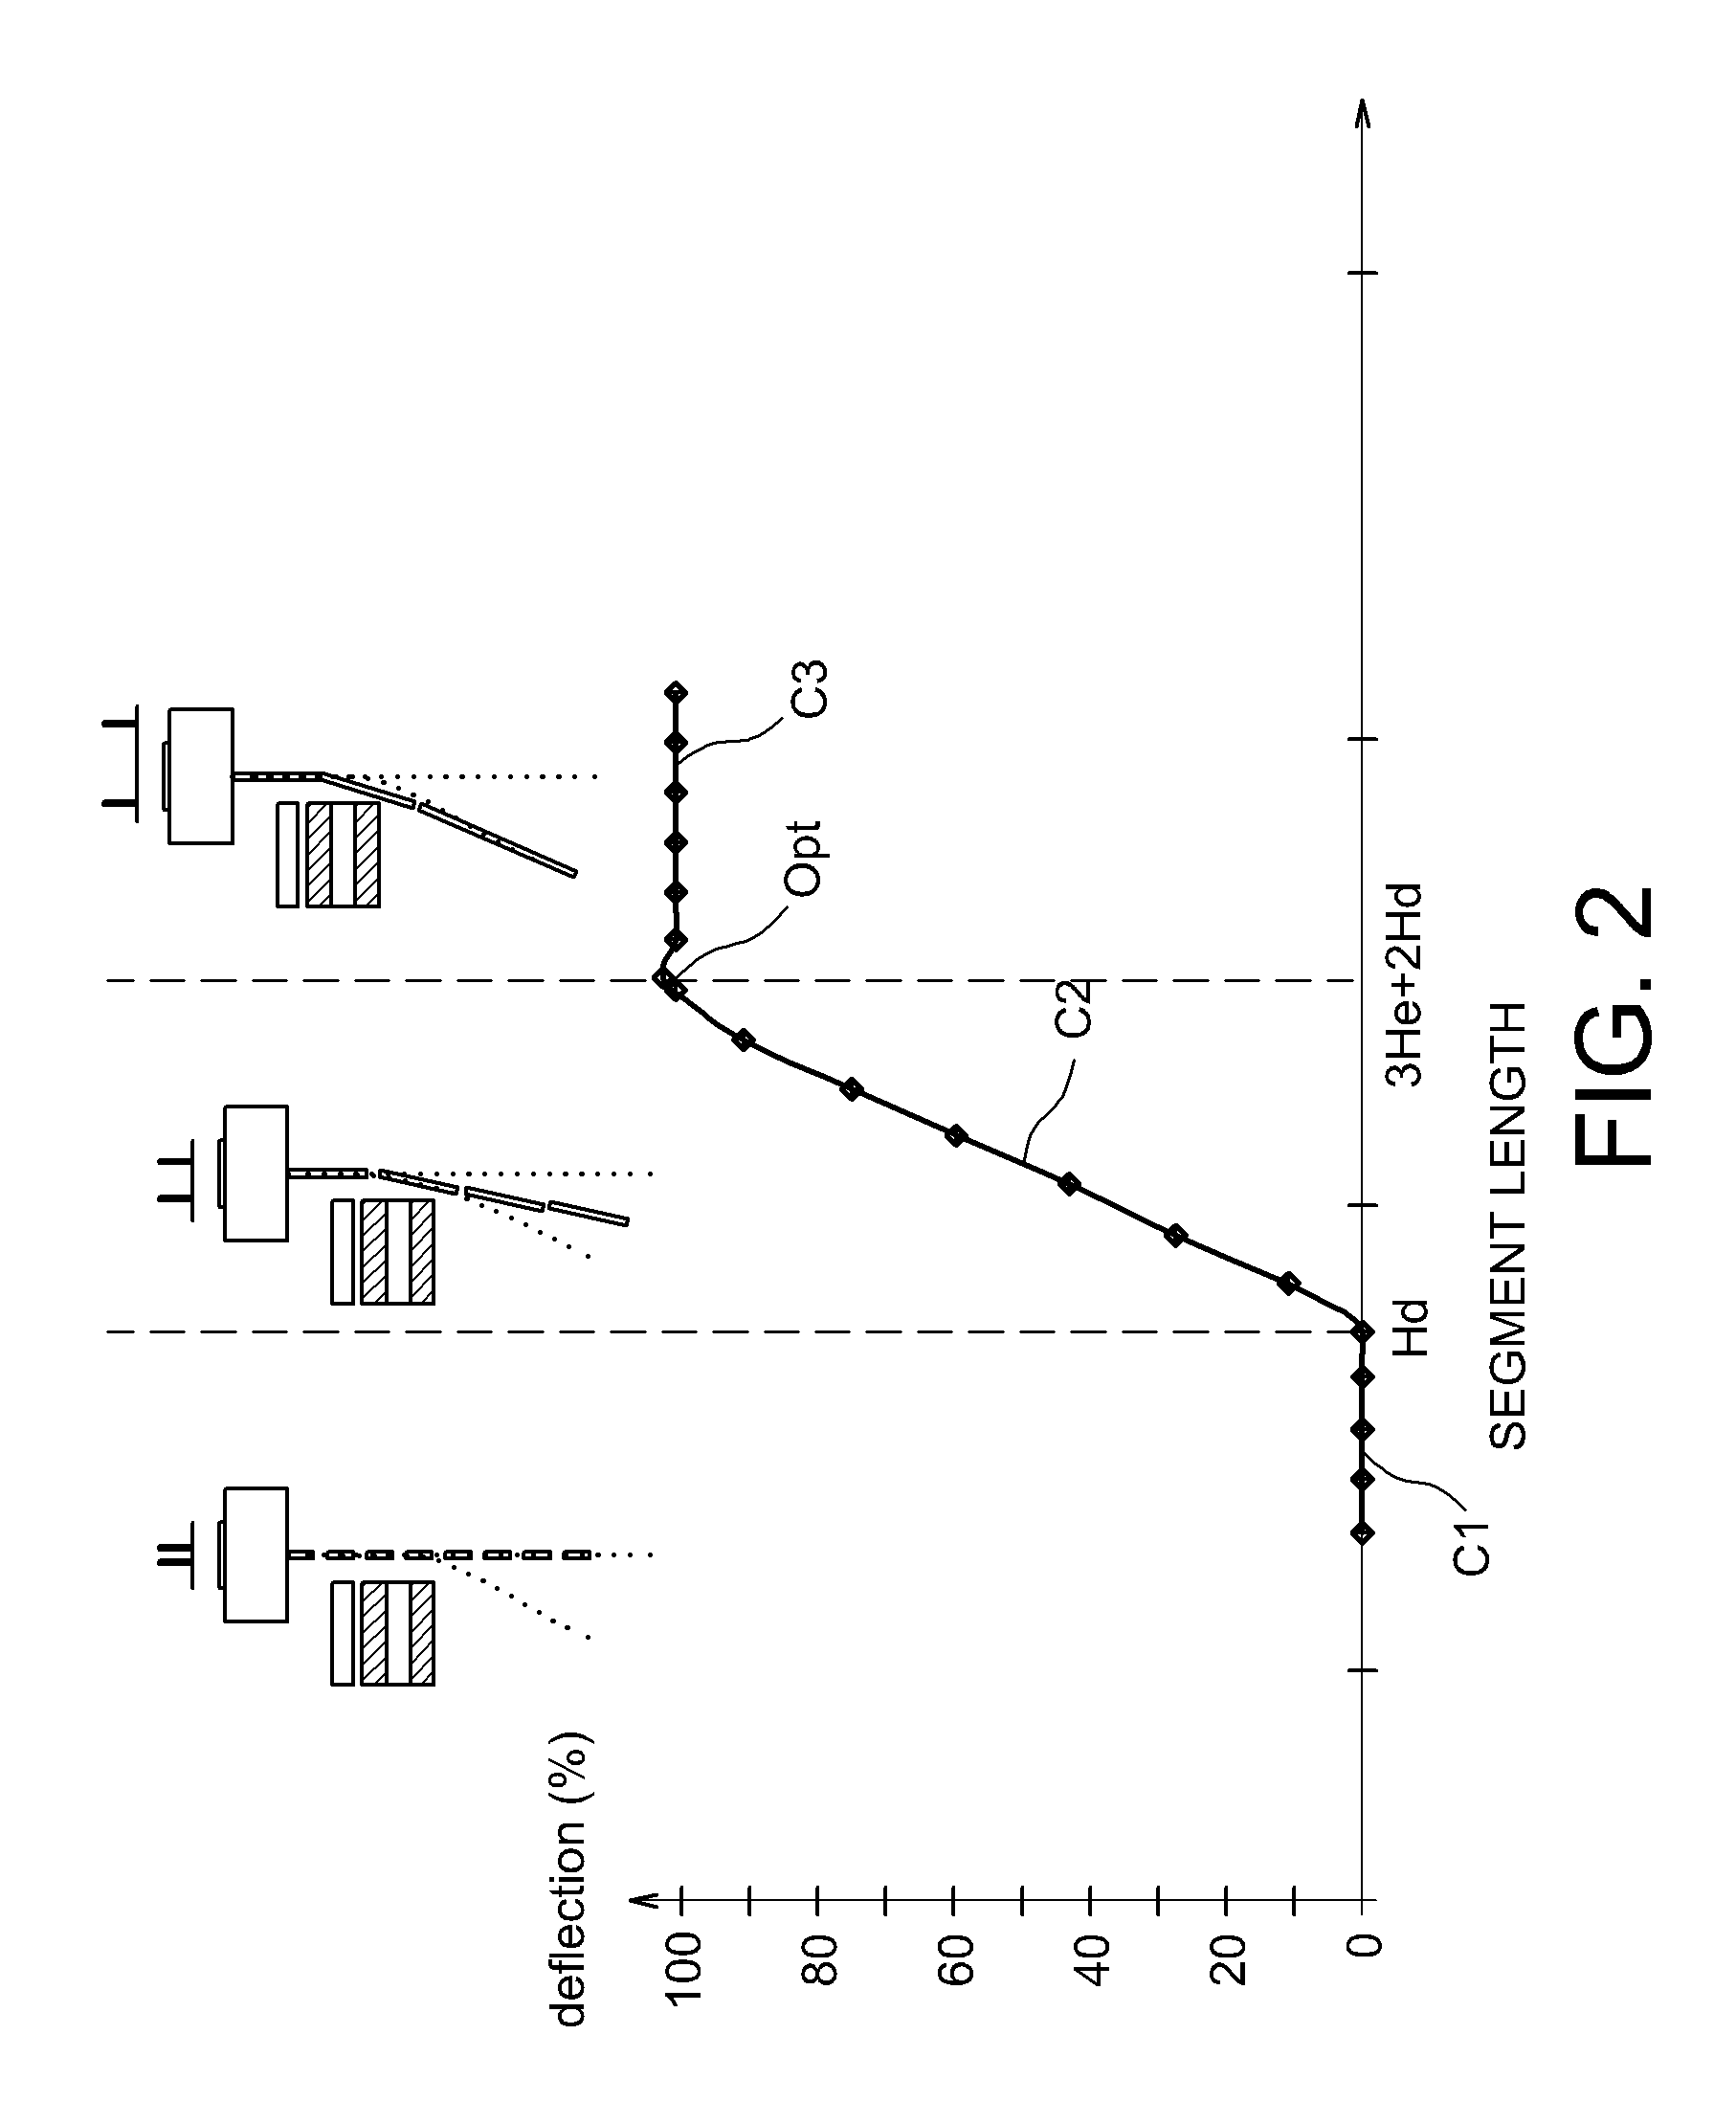 Inkjet printer operating a binary continuous-jet with optimum deflection and maximised print speed